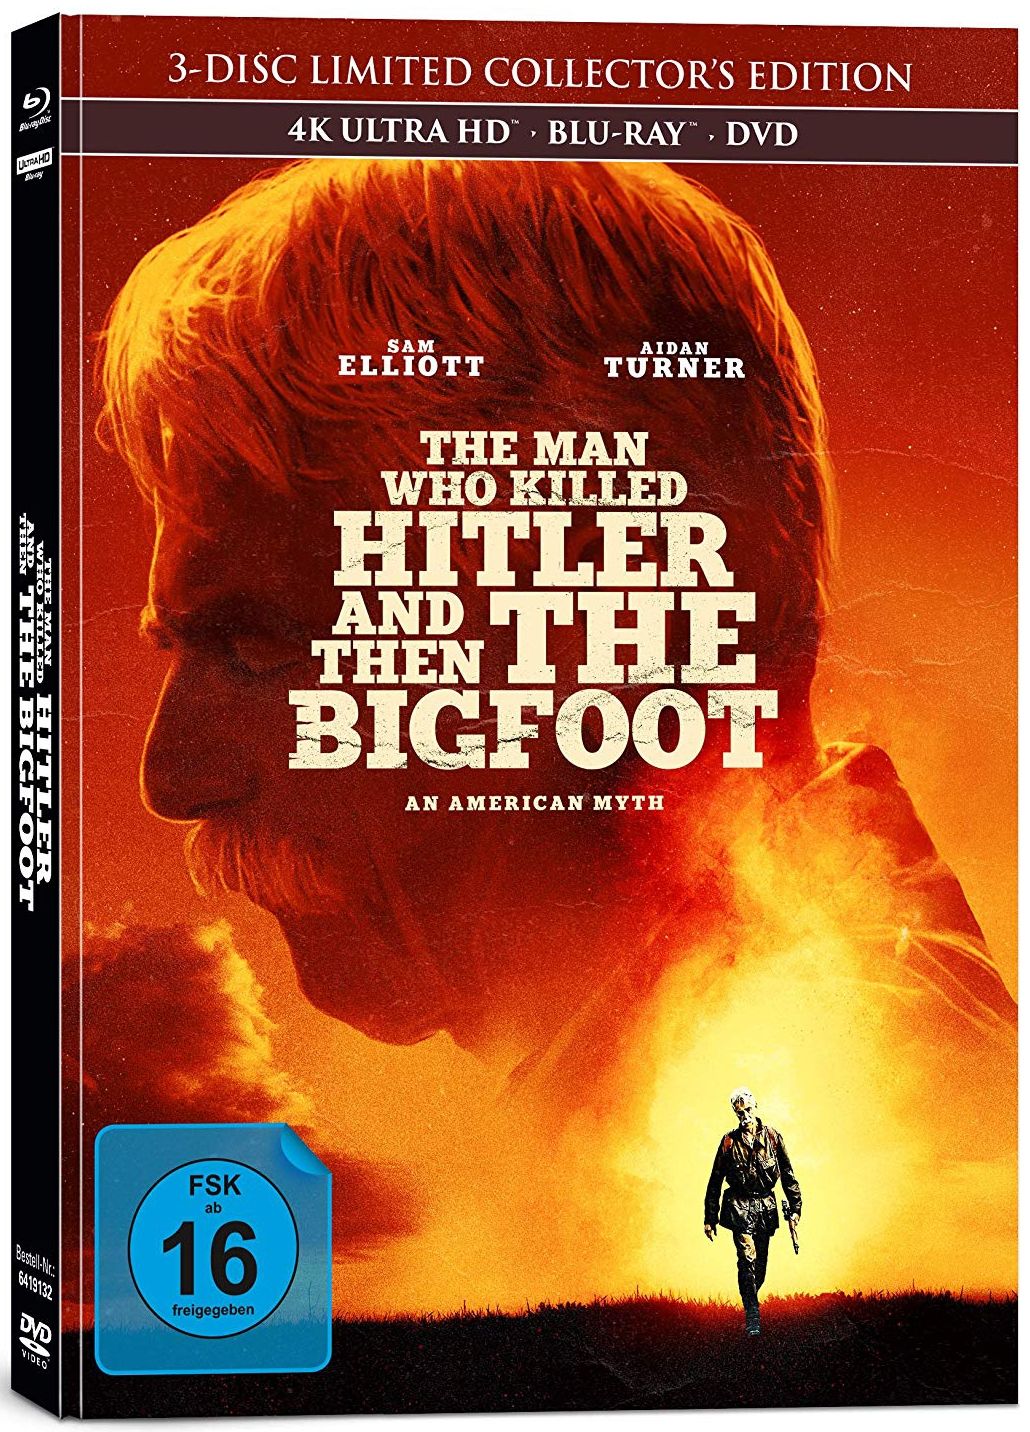 Man Who Killed Hitler and Then the Bigfoot, The (Lim. Uncut Mediabook) (DVD + UHD BLURAY + BLURAY)